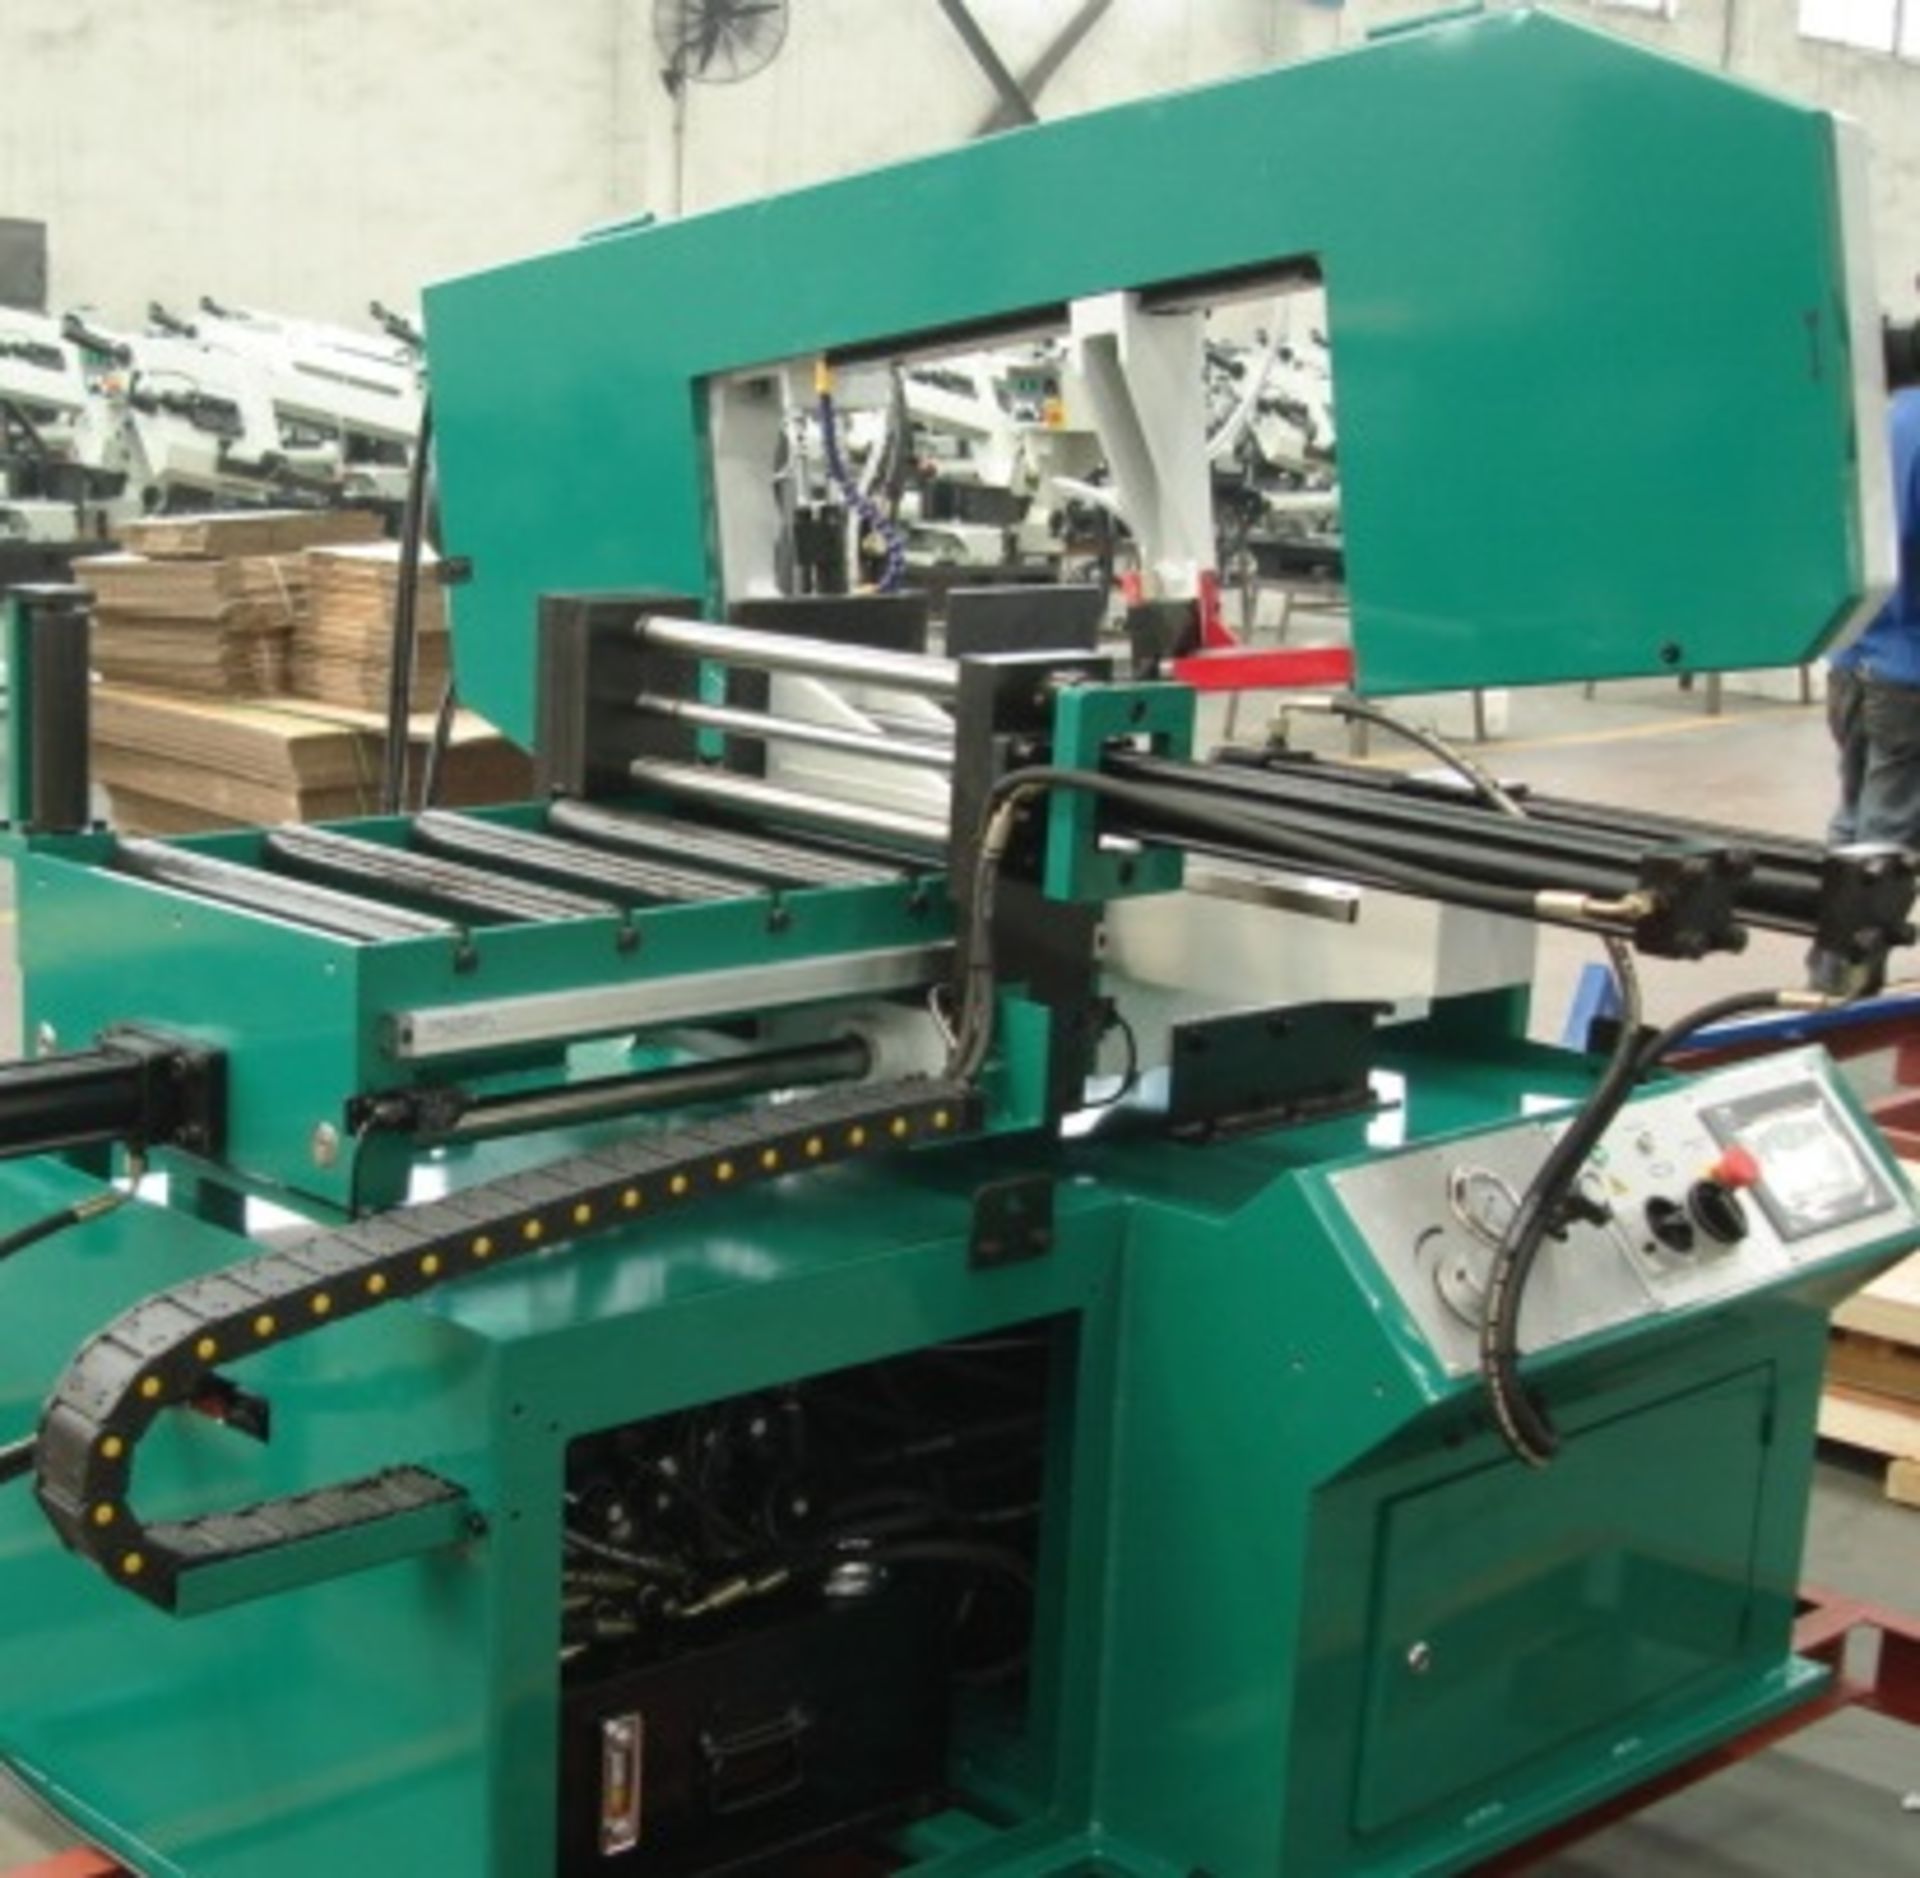 BS-460GB Fully Automatic CNC Horizontal Band Saw 220V 3 phase with 18 X 13 inch CAPACITY and CNC - Image 3 of 3